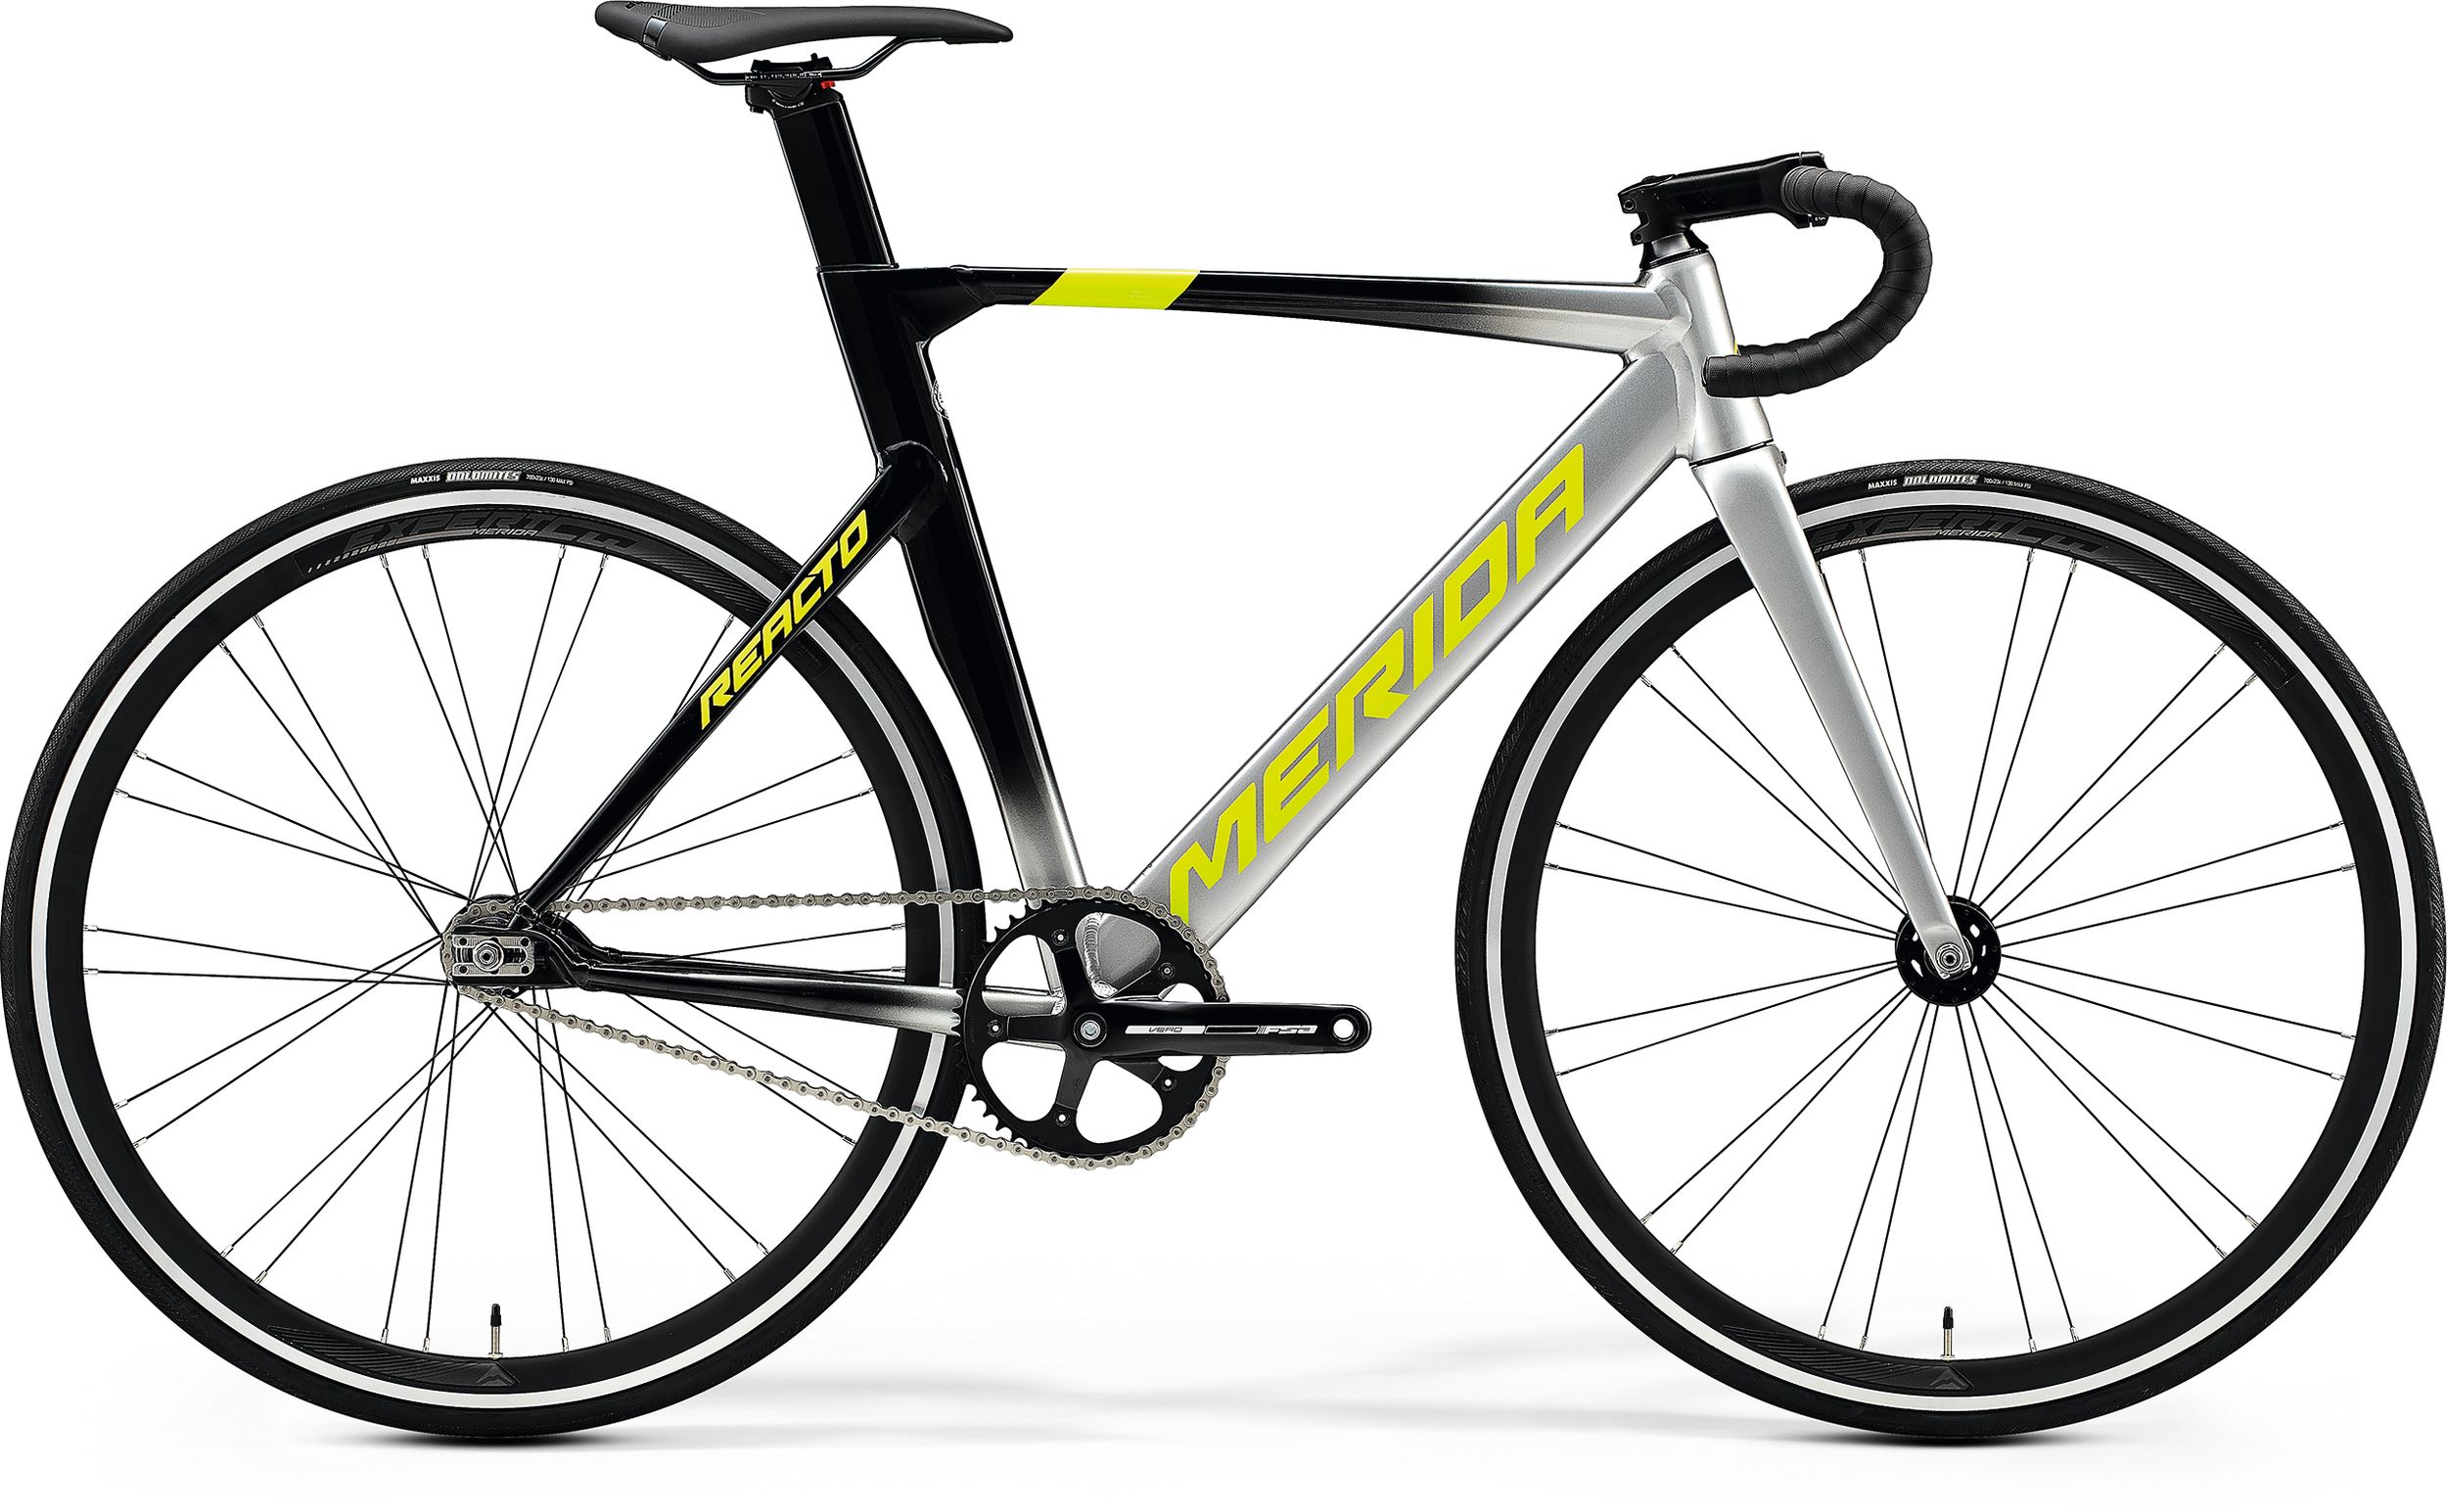 btwin cycles models and prices